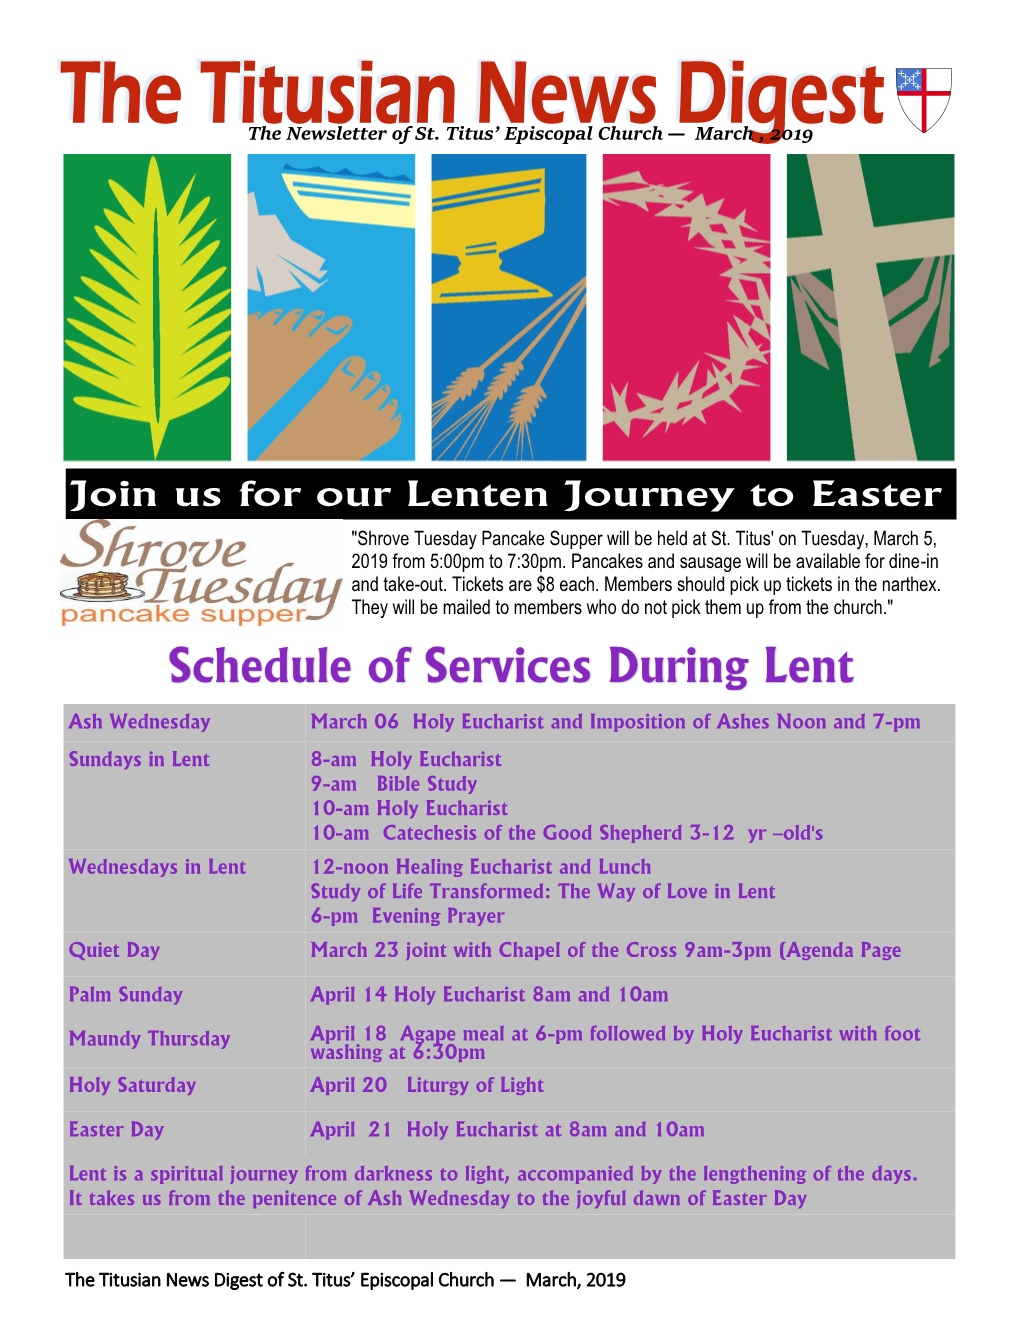 Schedule of Services During Lent